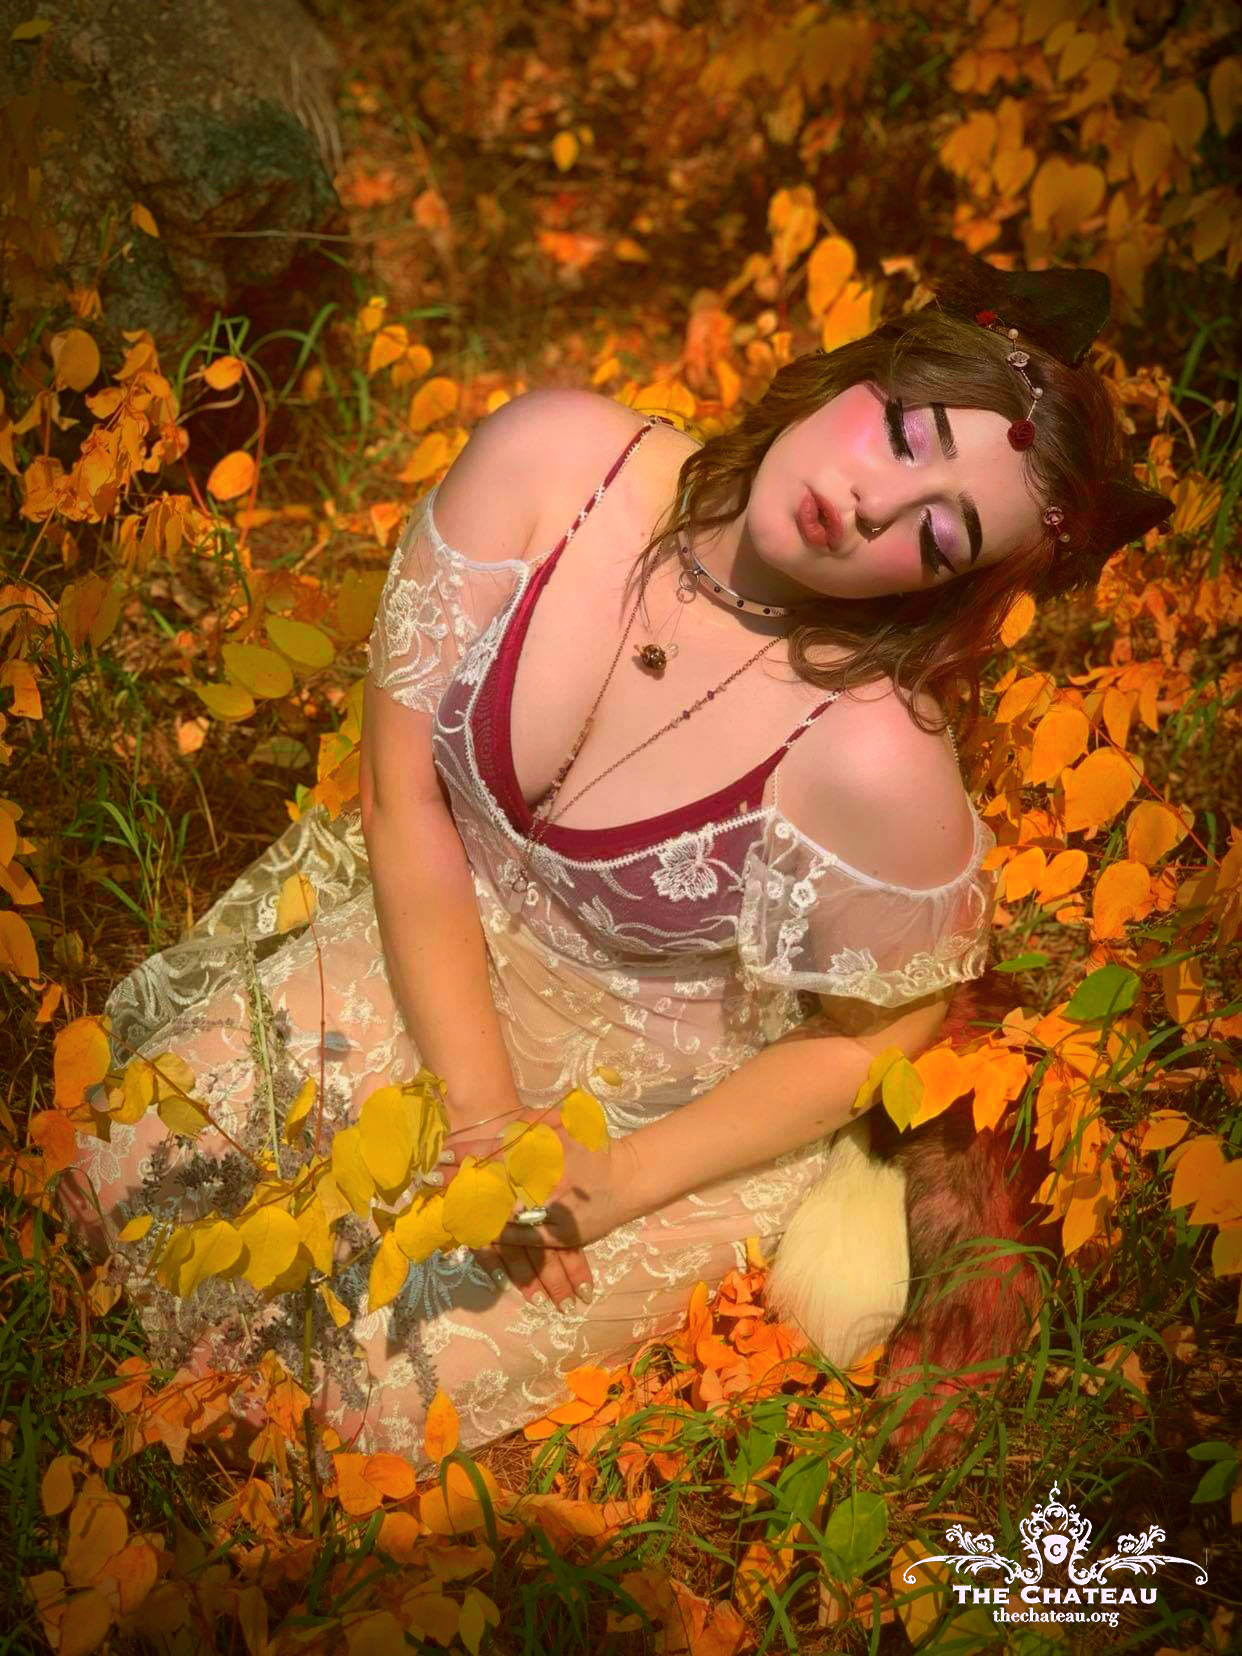 Longing for Autumn with Lexi_Denver post thumbnail